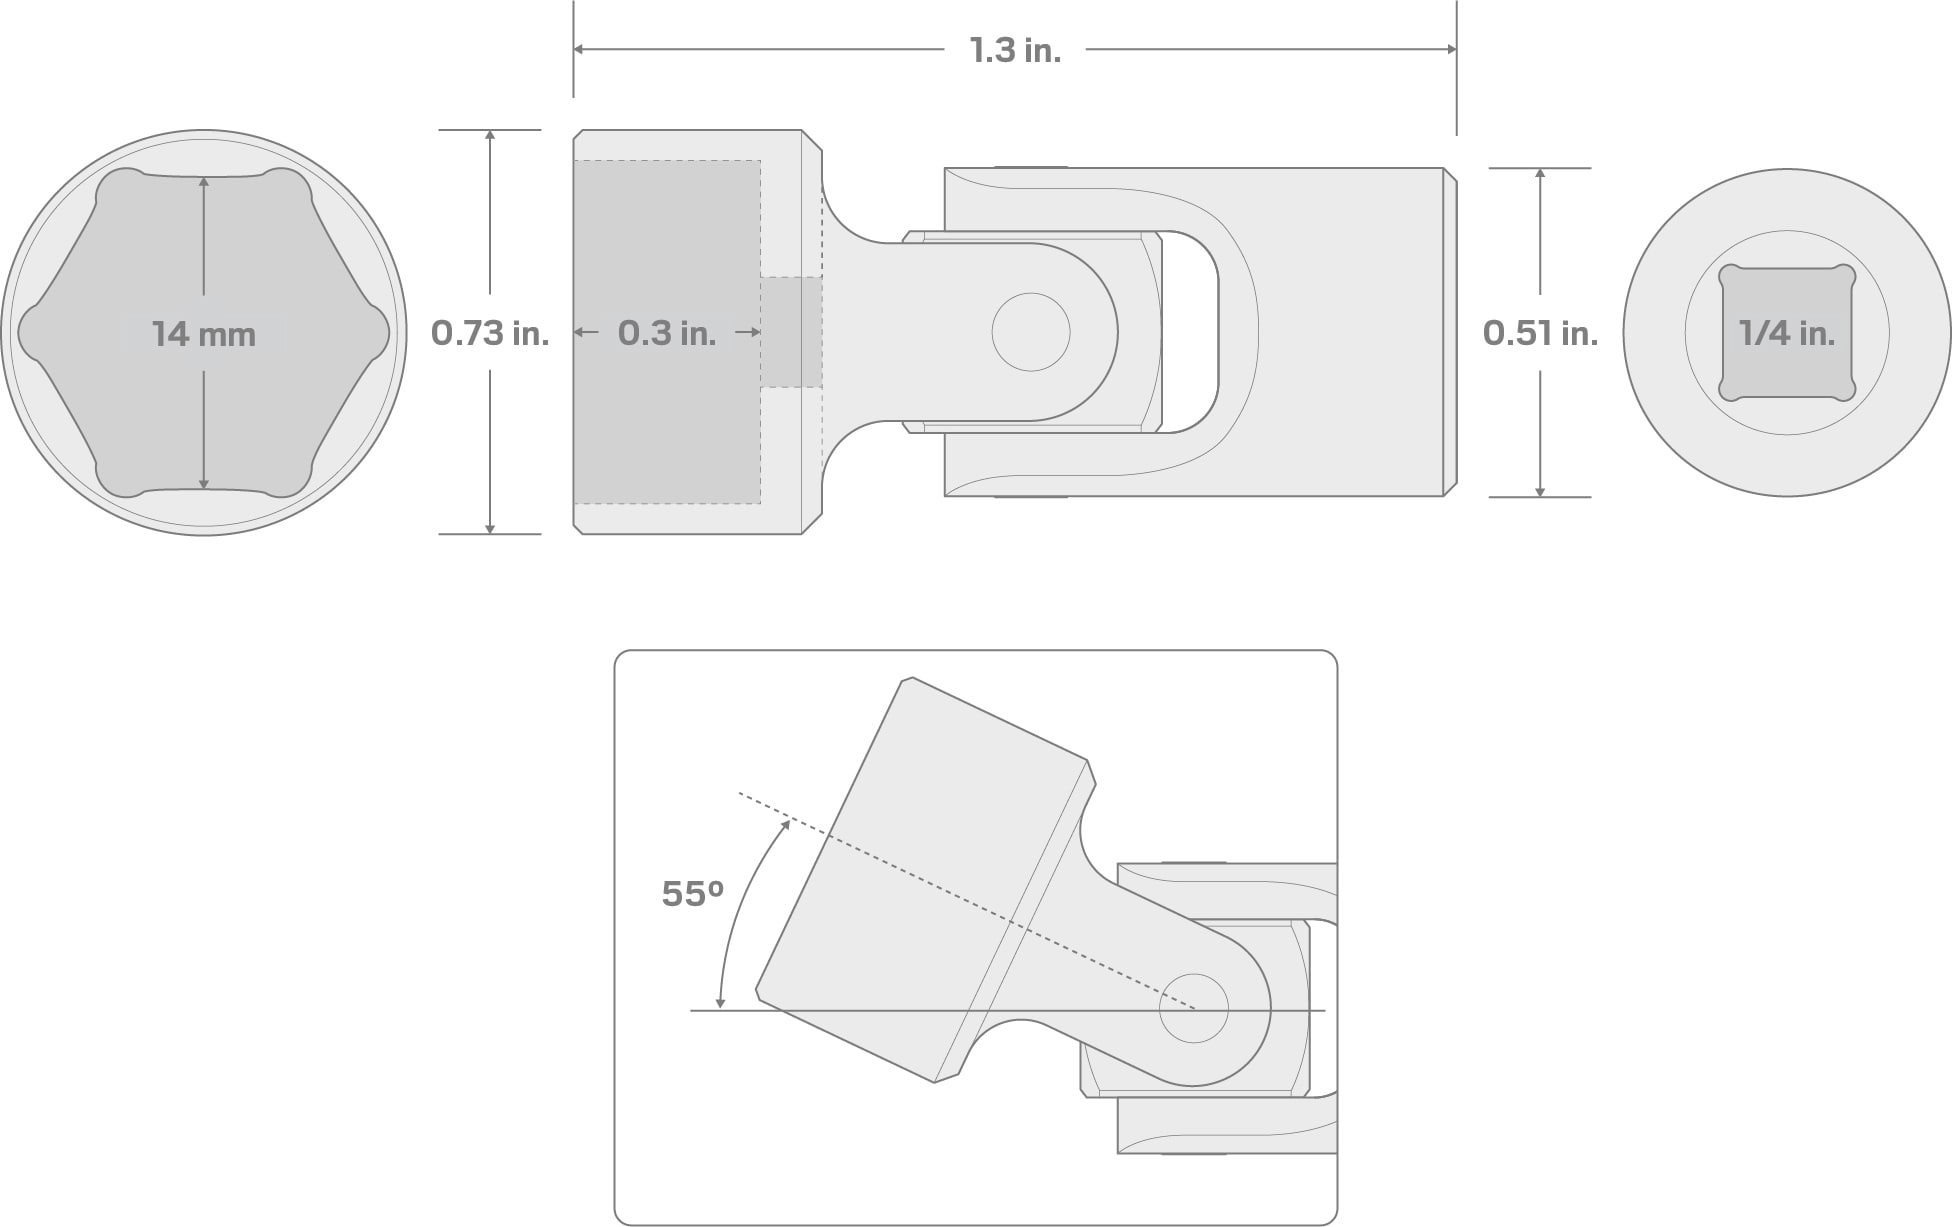 Specs for 1/4 Inch Drive x 14 mm Universal Joint Socket